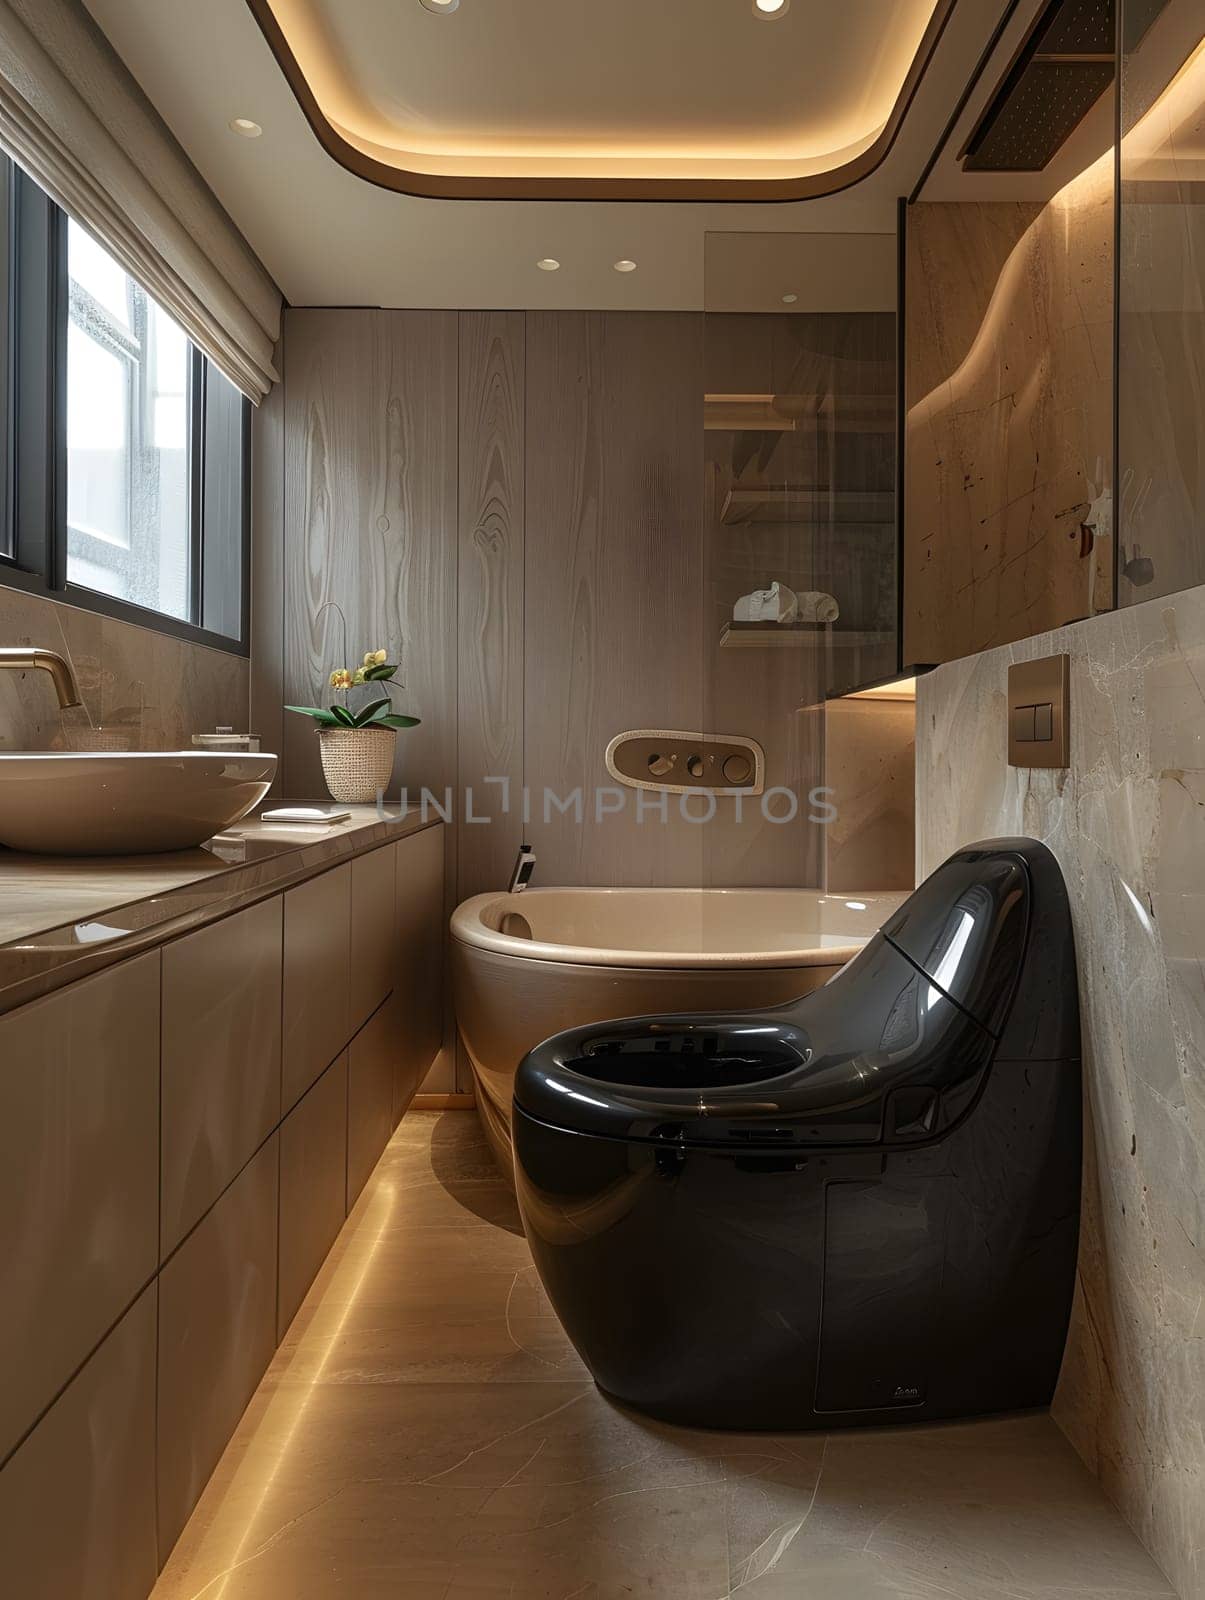 A bathroom in a building property featuring a tub, toilet, sink, and window. The interior design includes composite material flooring and wooden fixtures